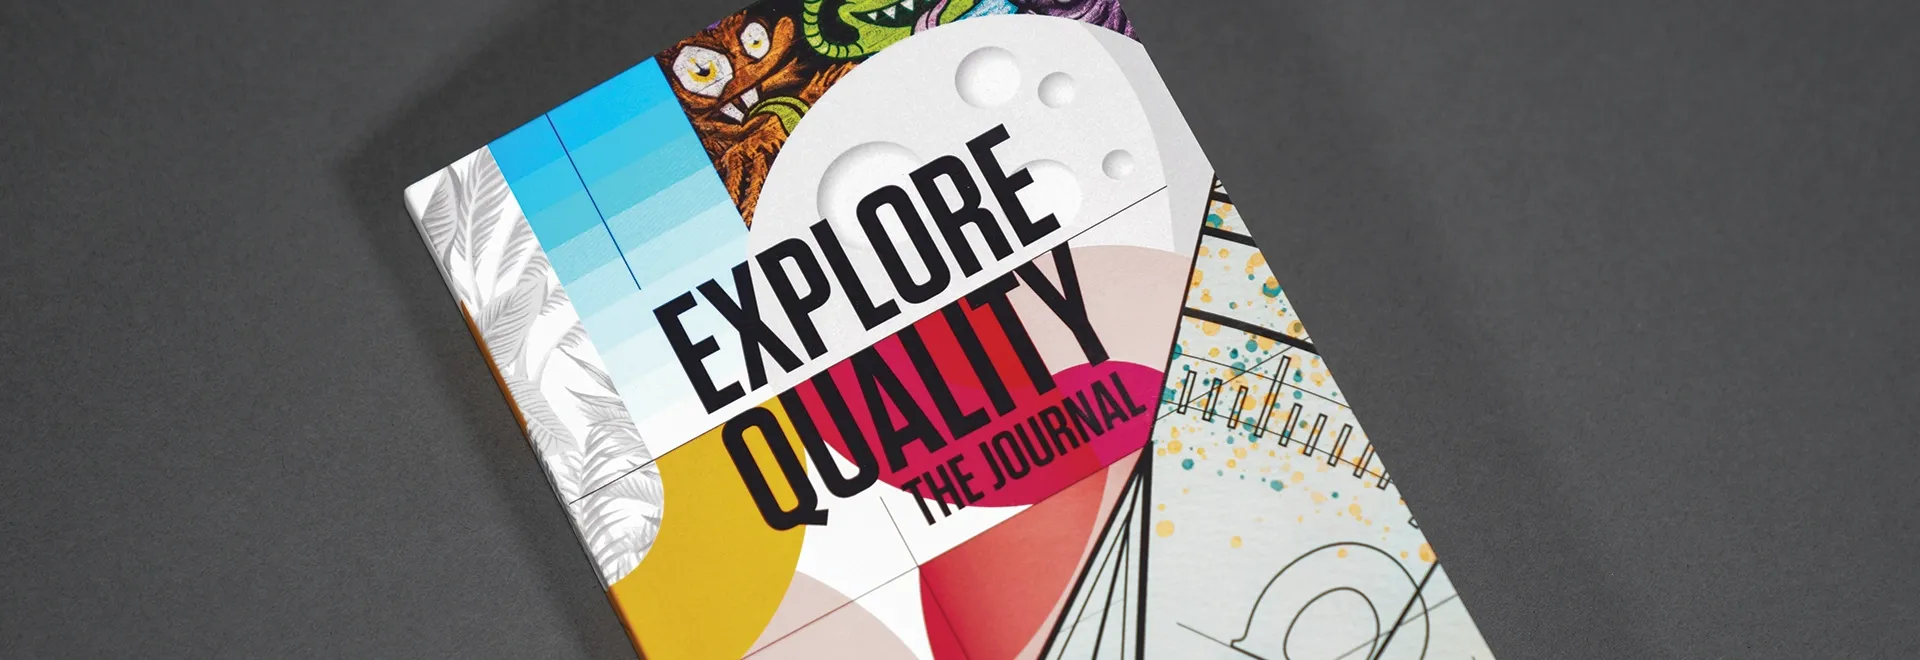 Explore Quality Journal cover